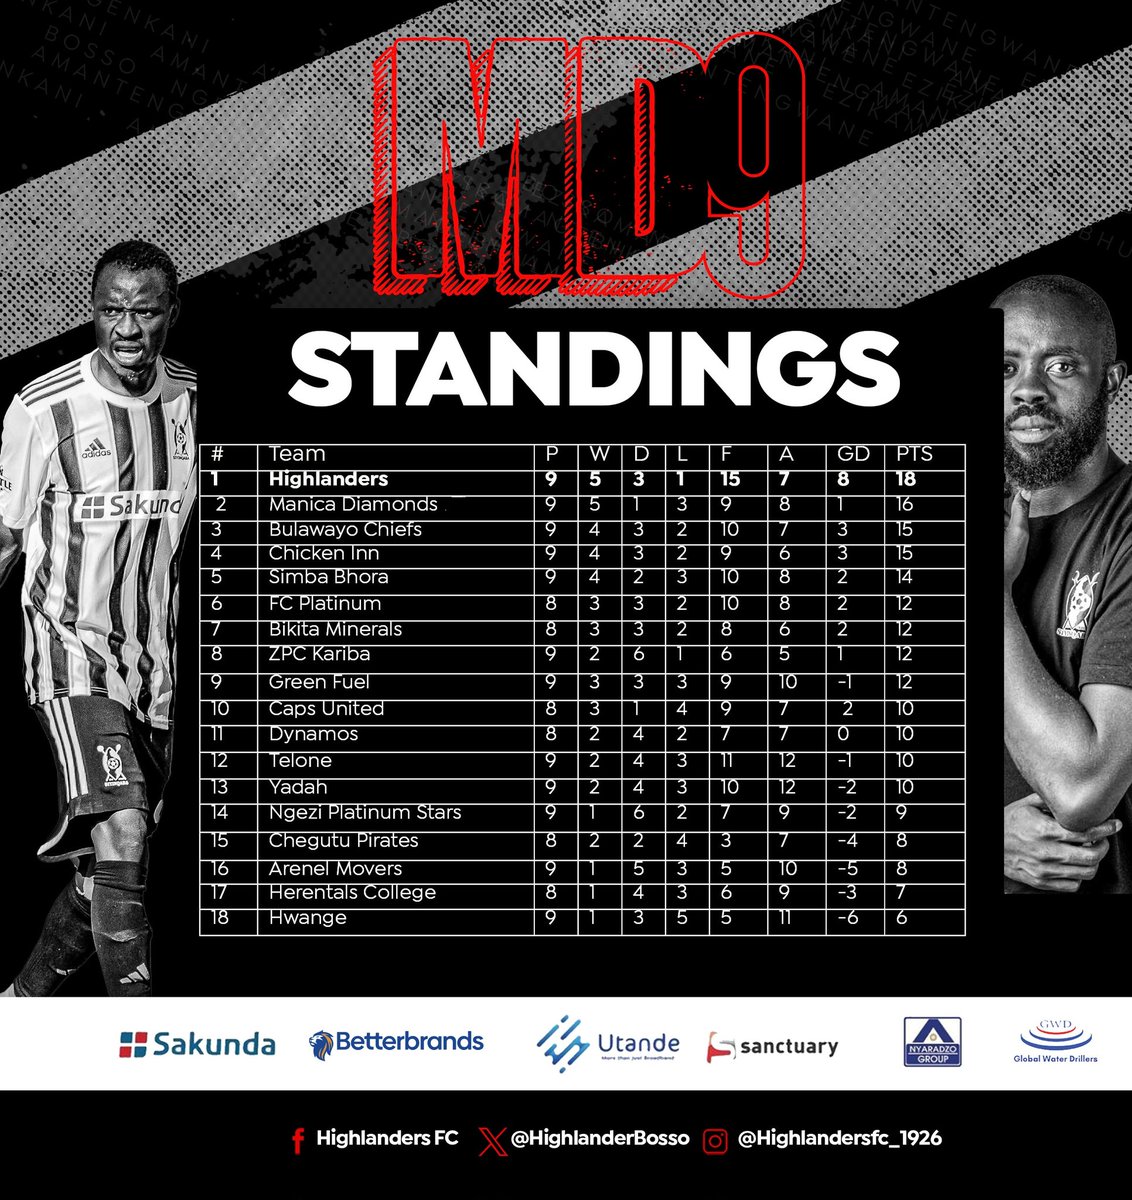 𝗔𝗦 𝗜𝗧 𝗦𝗧𝗔𝗡𝗗𝗦 Following our win over Caps United, the boys remained at the top of the PSL log standings. #Bosso